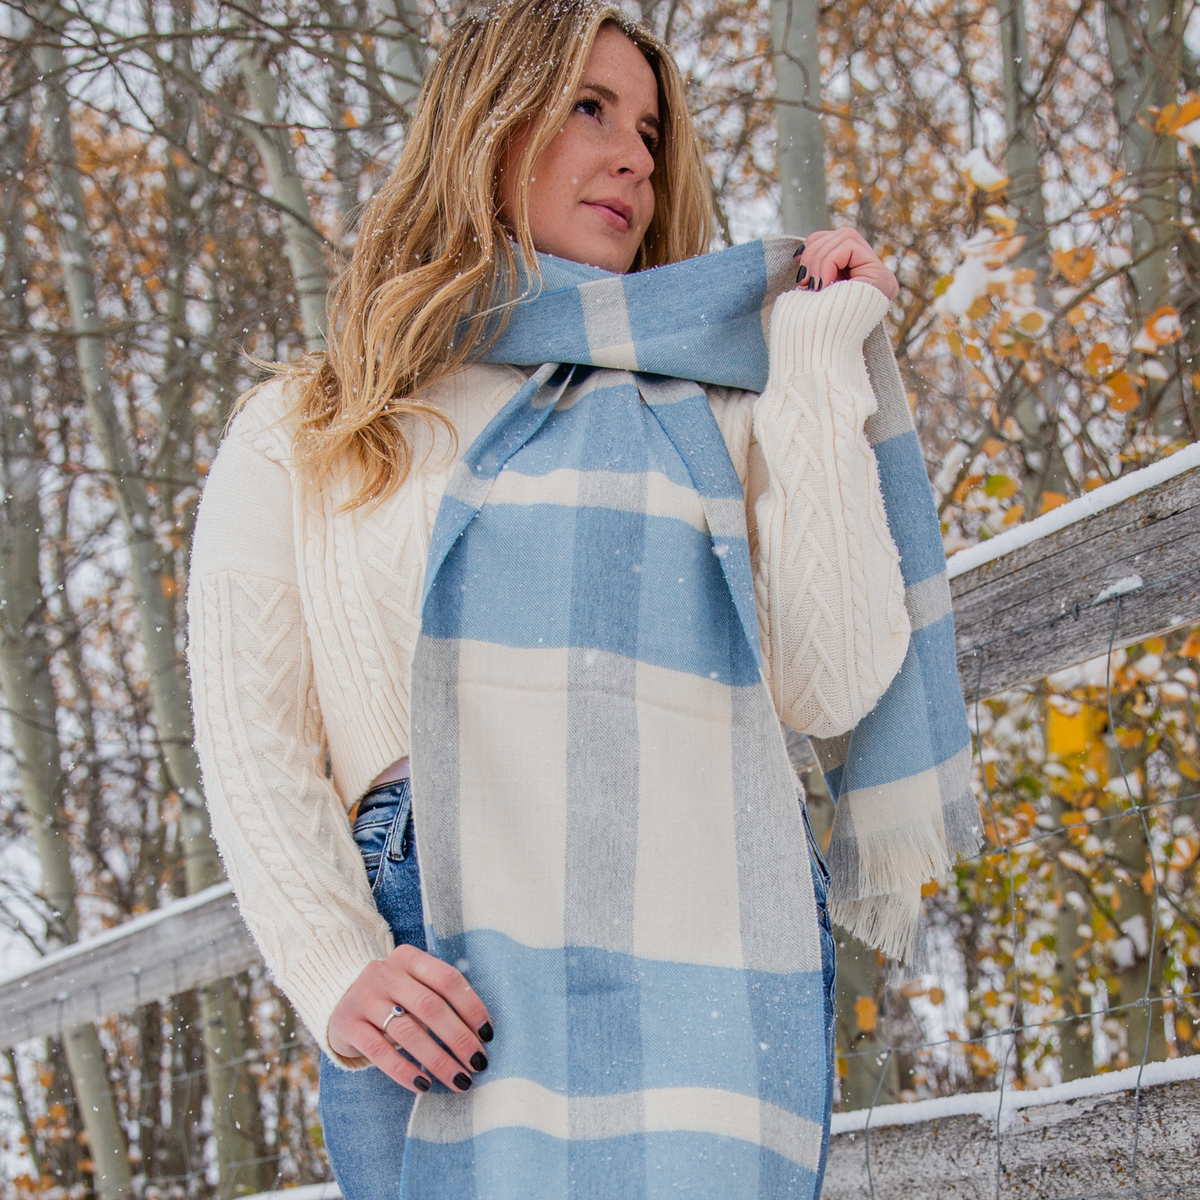 A blonde woman standing next to a wooden fence wearing an ivory woven sweate, blue jeans, and a beautiful soft cozy luxury stylish fashion comfortable accessory sky blue, light gray, and natural white alpaca wool scarf with tassels.